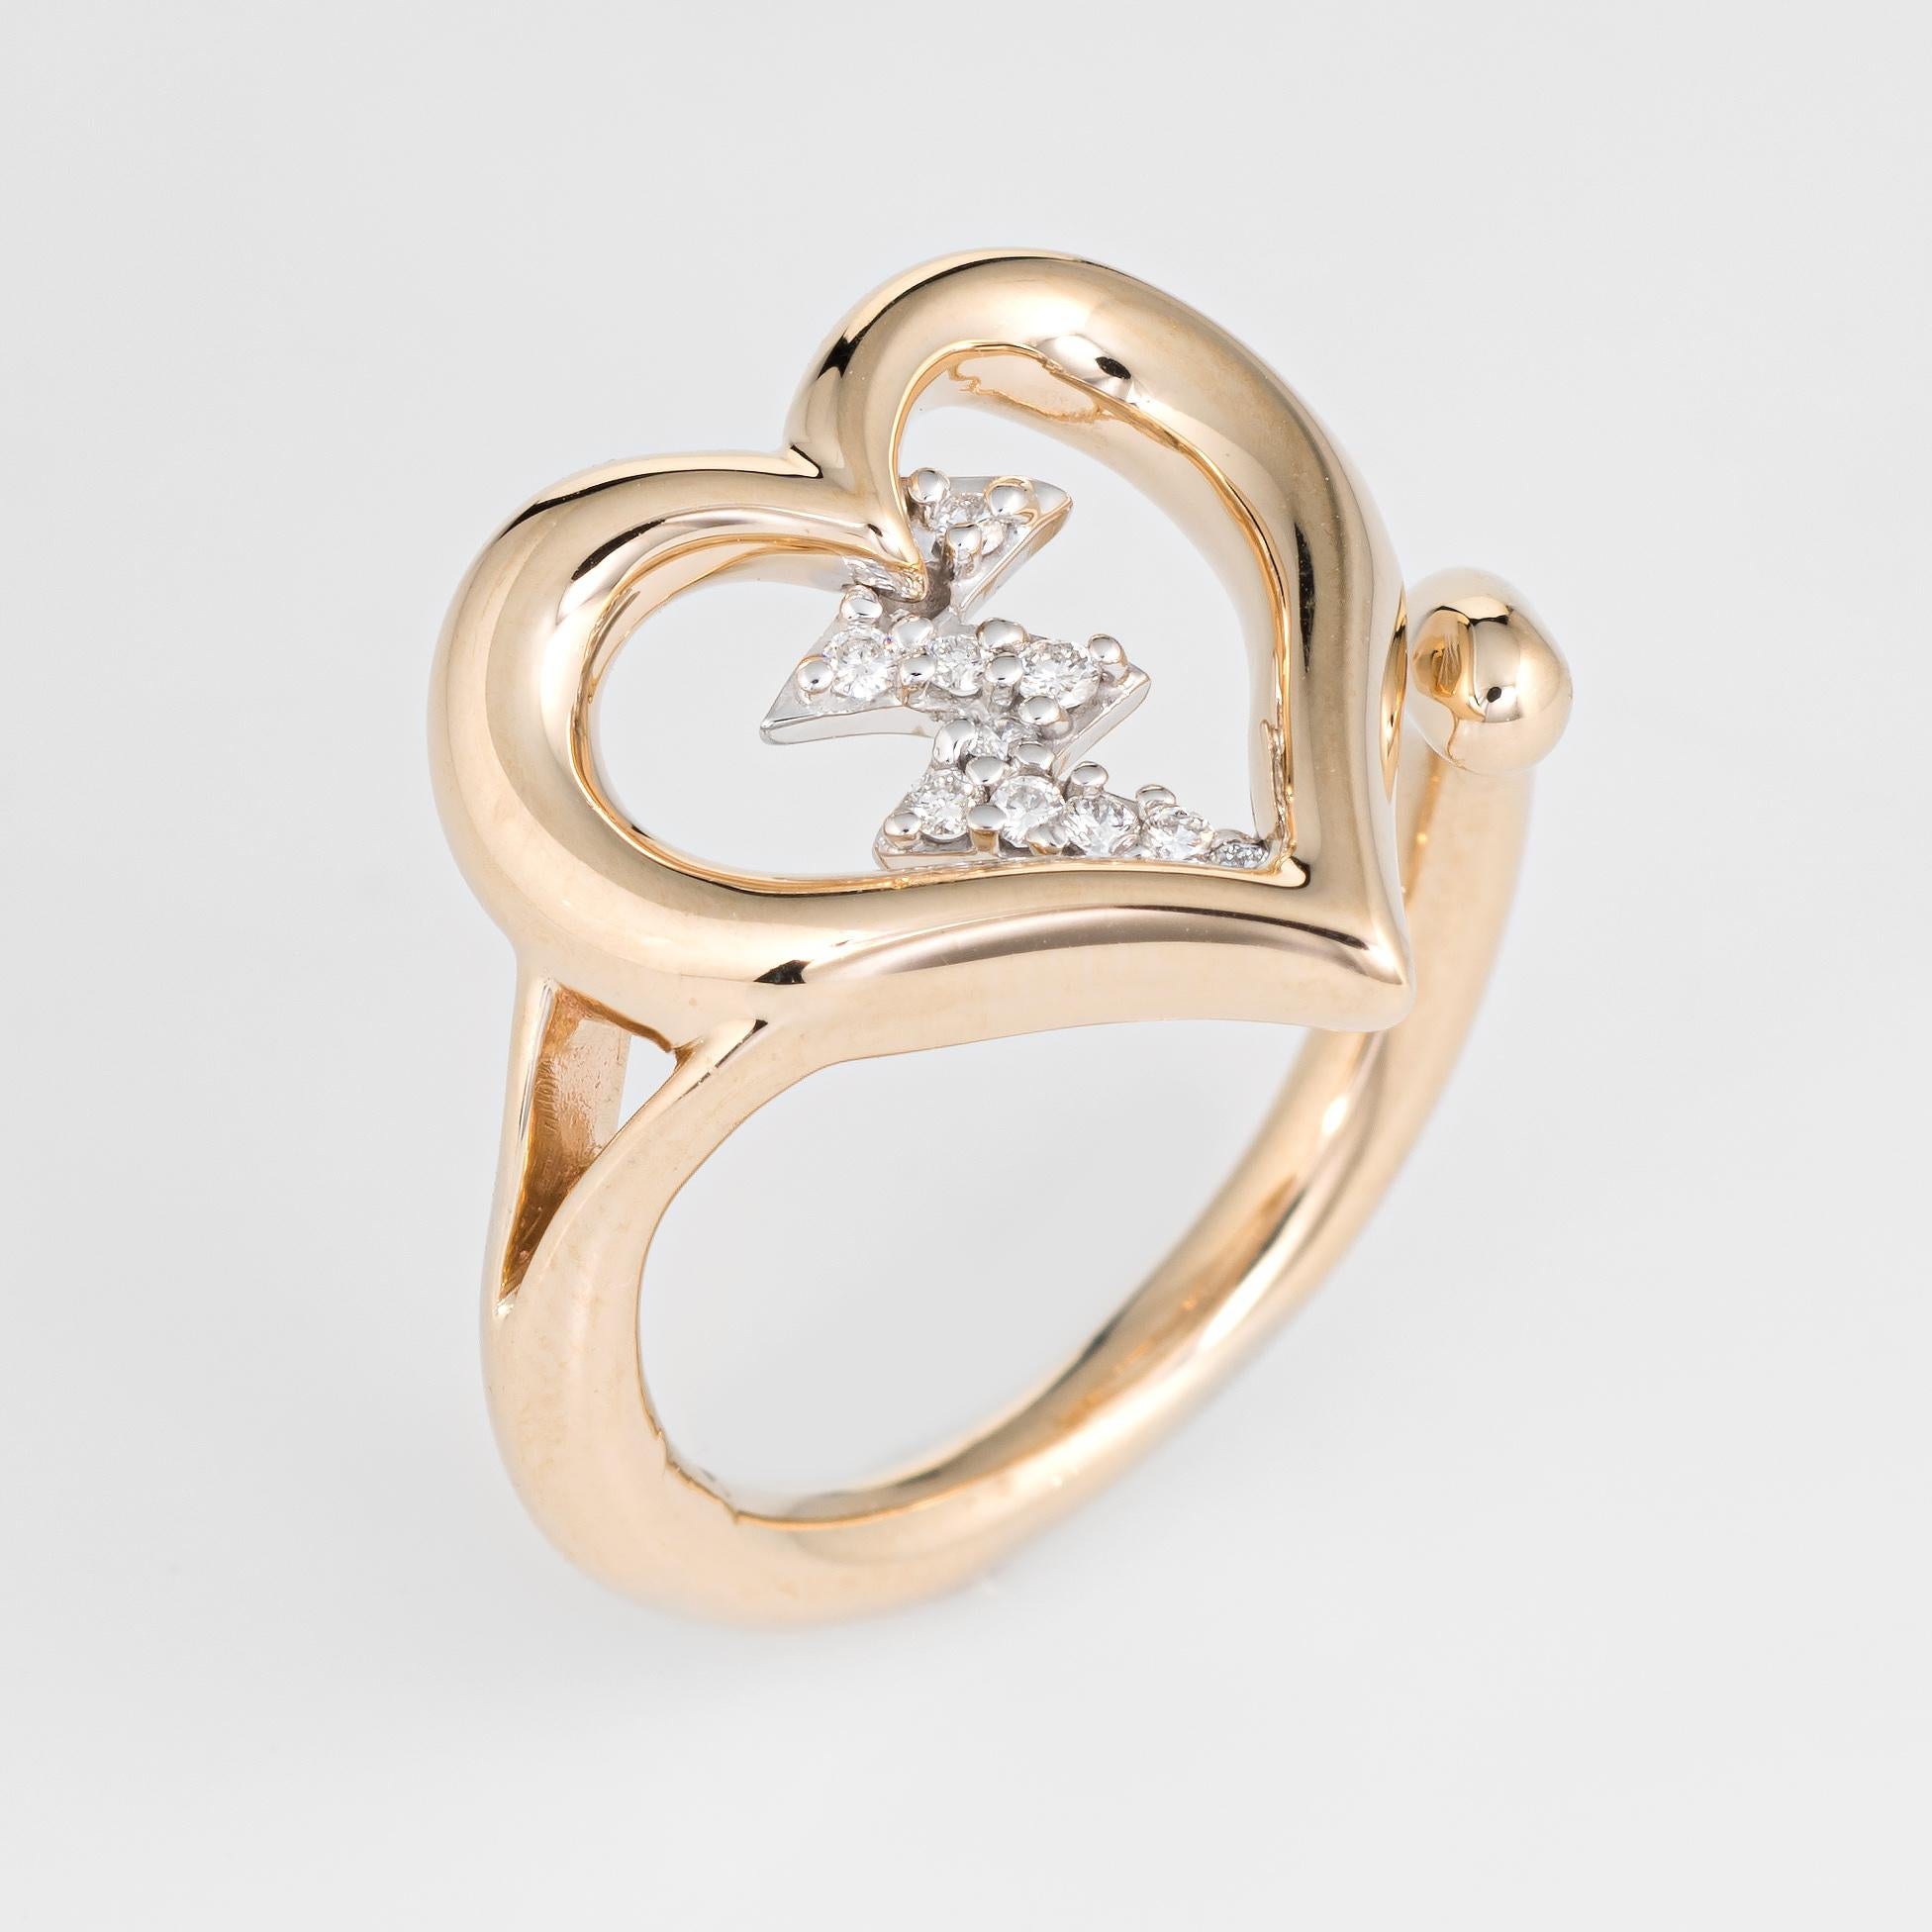 Stylish estate diamond heartbeat ring crafted in 14 karat yellow gold. 

10 diamonds total an estimated 0.05 carats (estimated at H-I color and VS2-SI1 clarity). 

The distinct ring features a diamond set heartbeat down the center of the heart. The